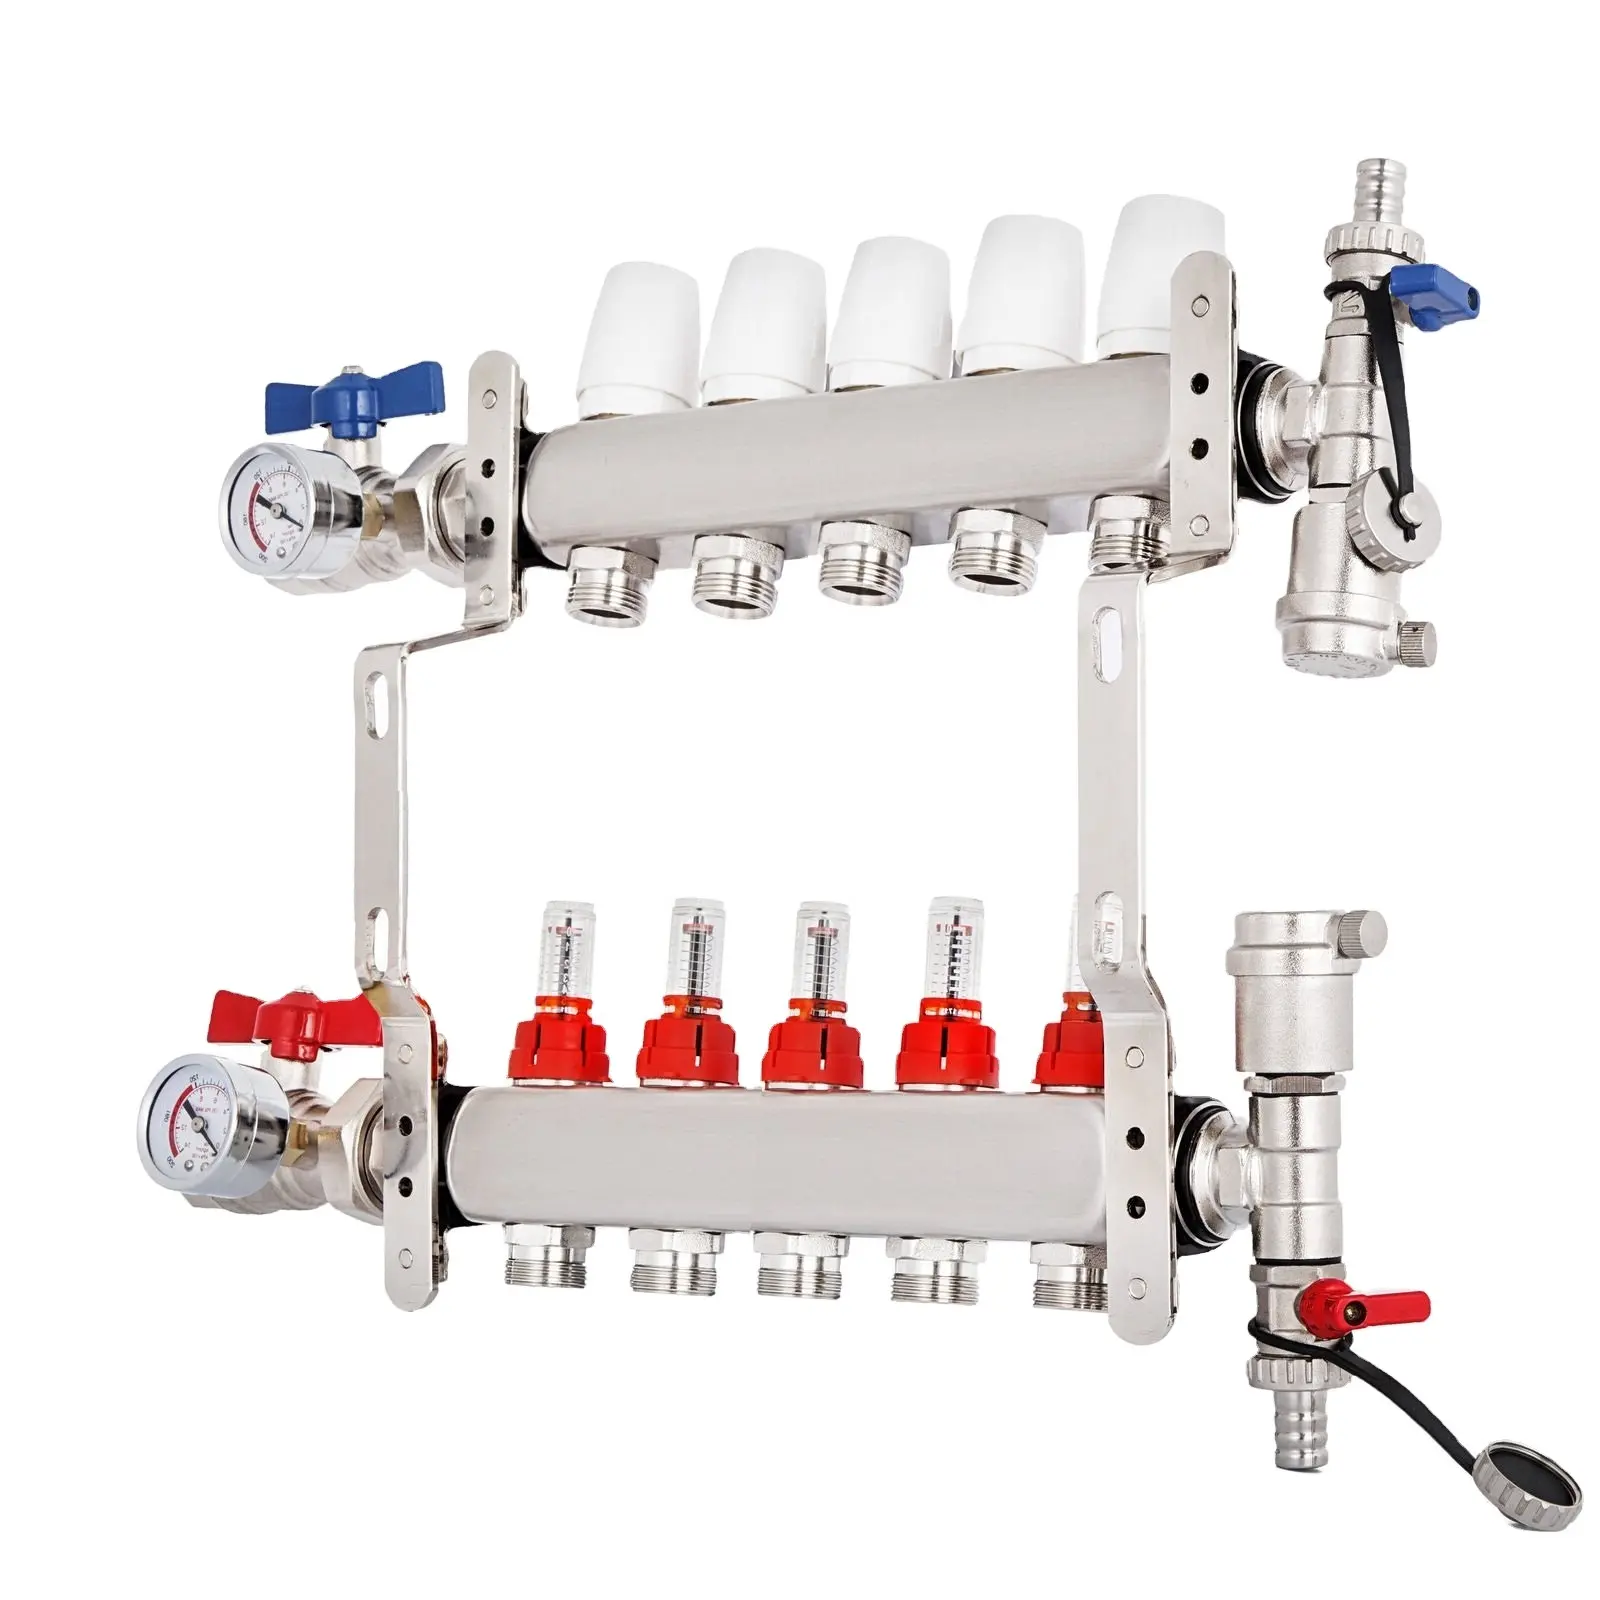 Stainless Steel Hydronic Under floor Water Heating System Flow Meters Manifold